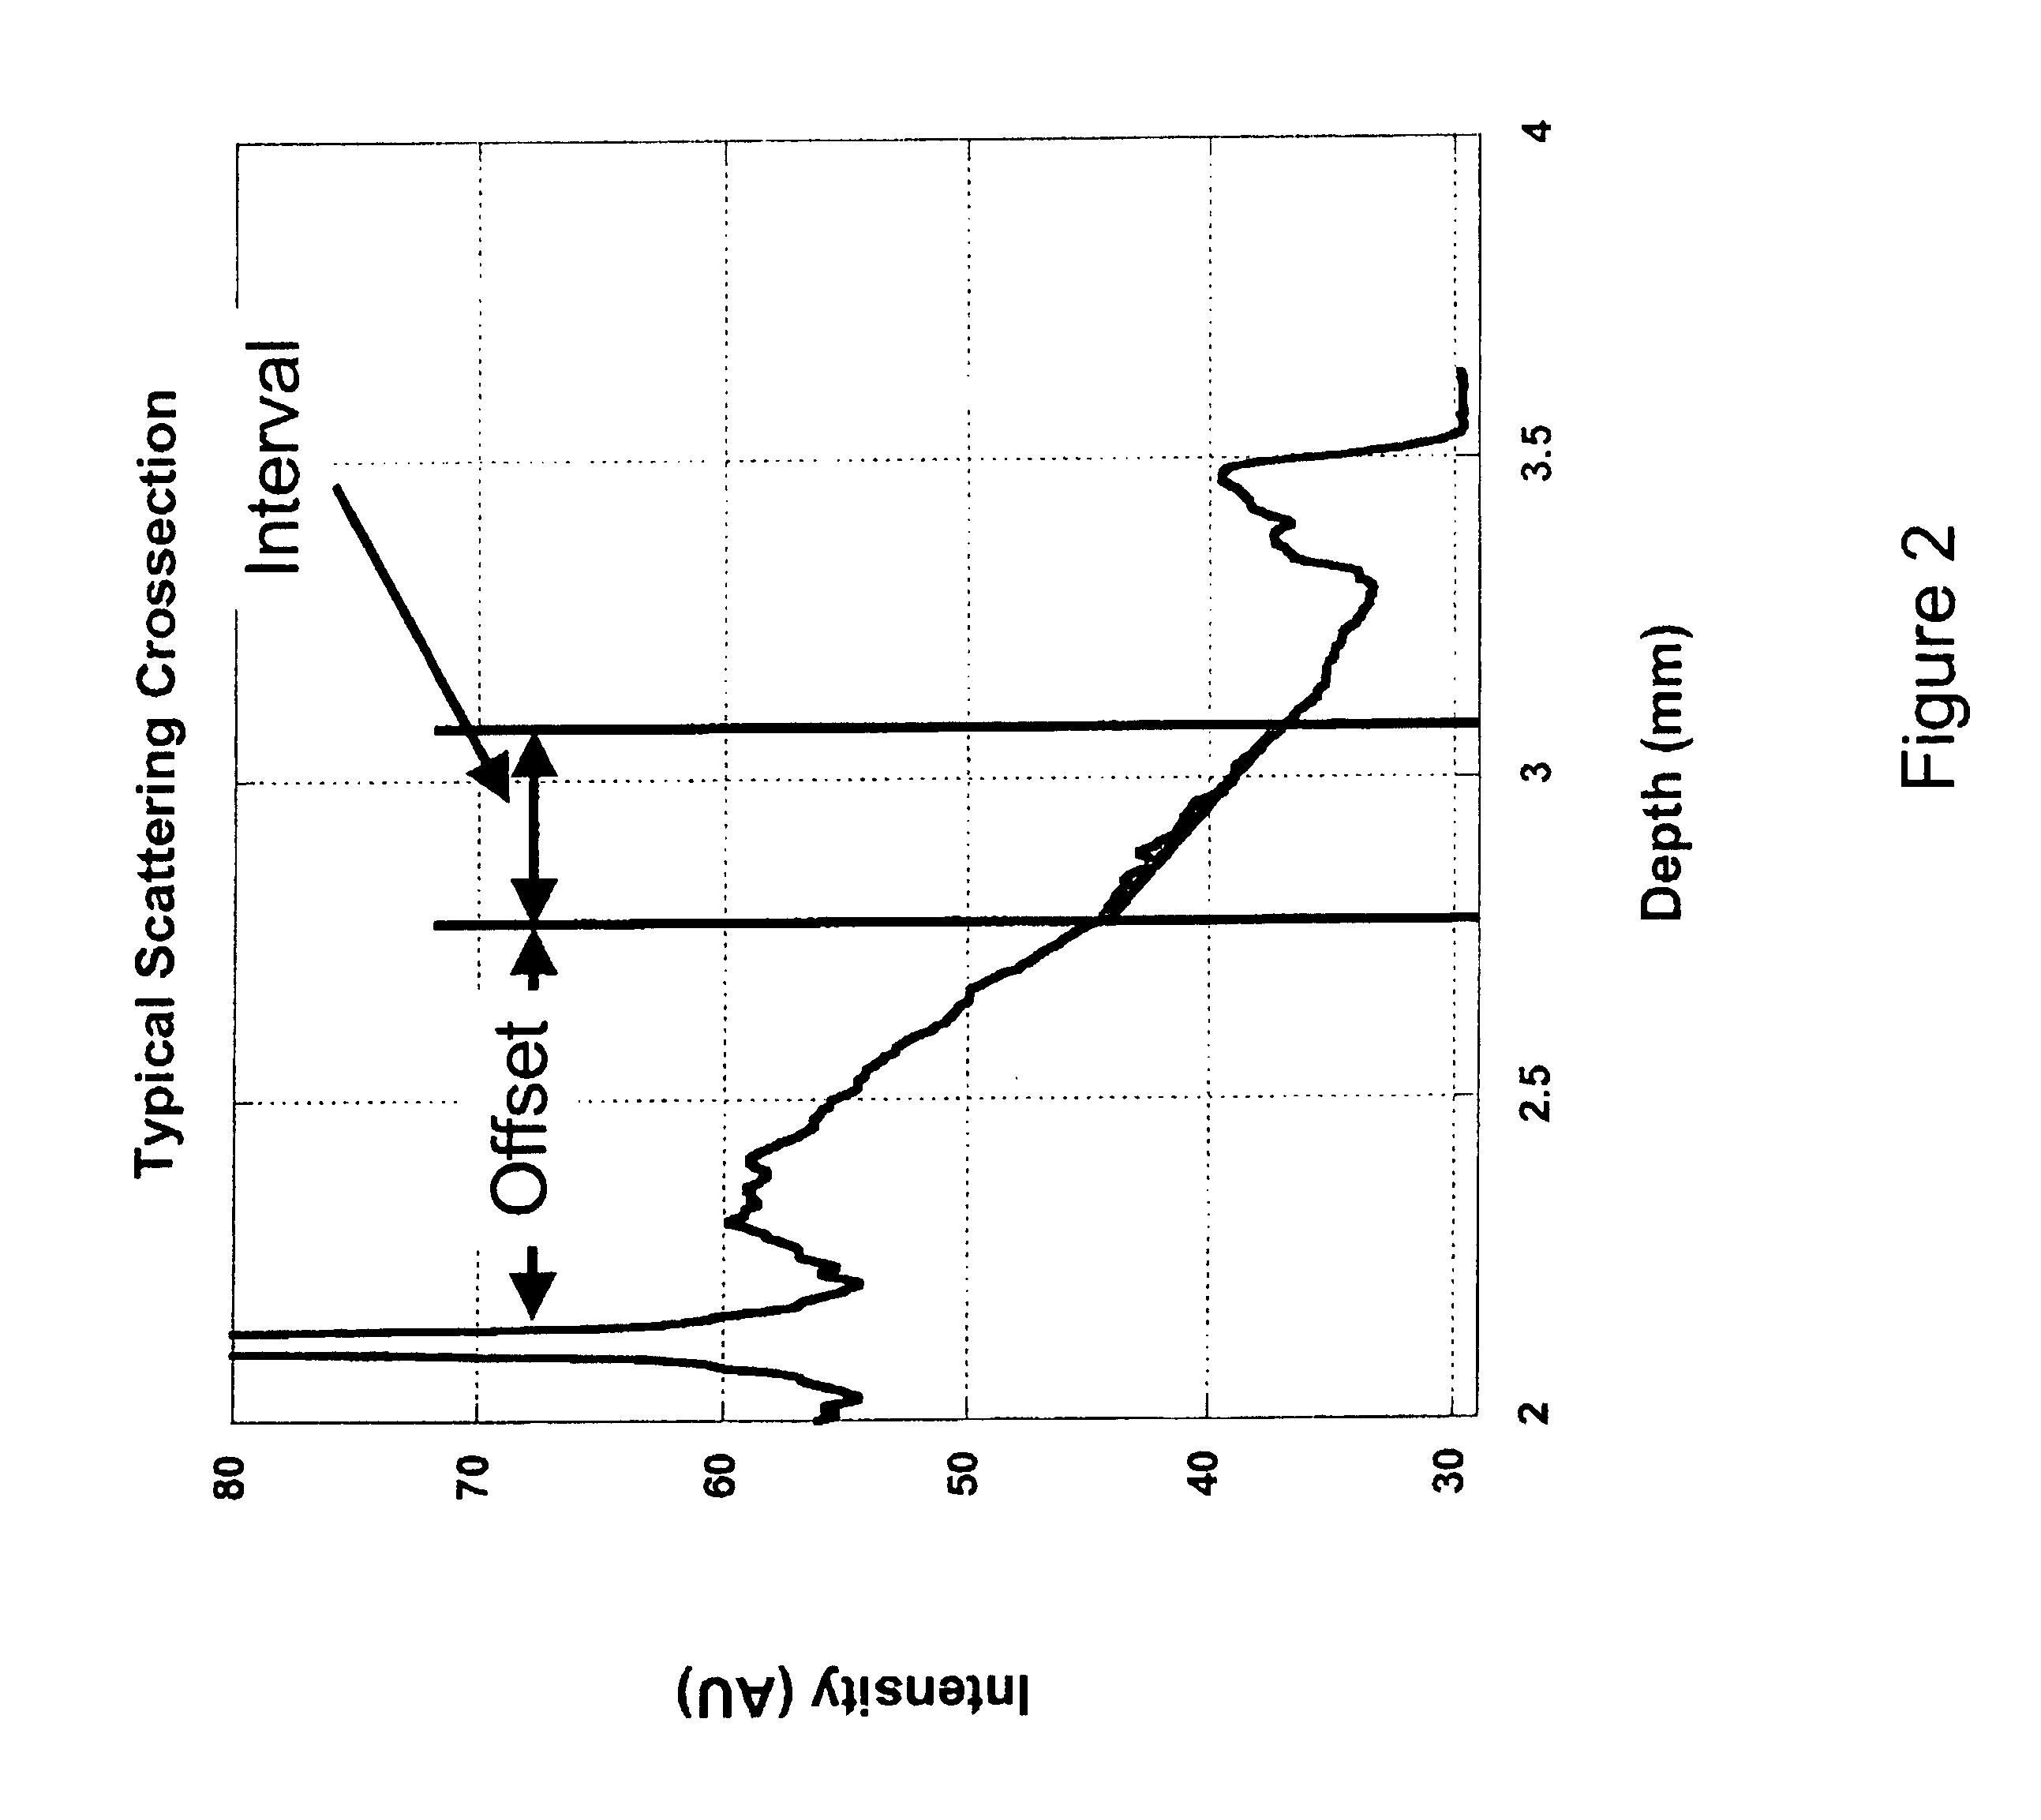 Method for data reduction and calibration of an OCT-based blood glucose monitor